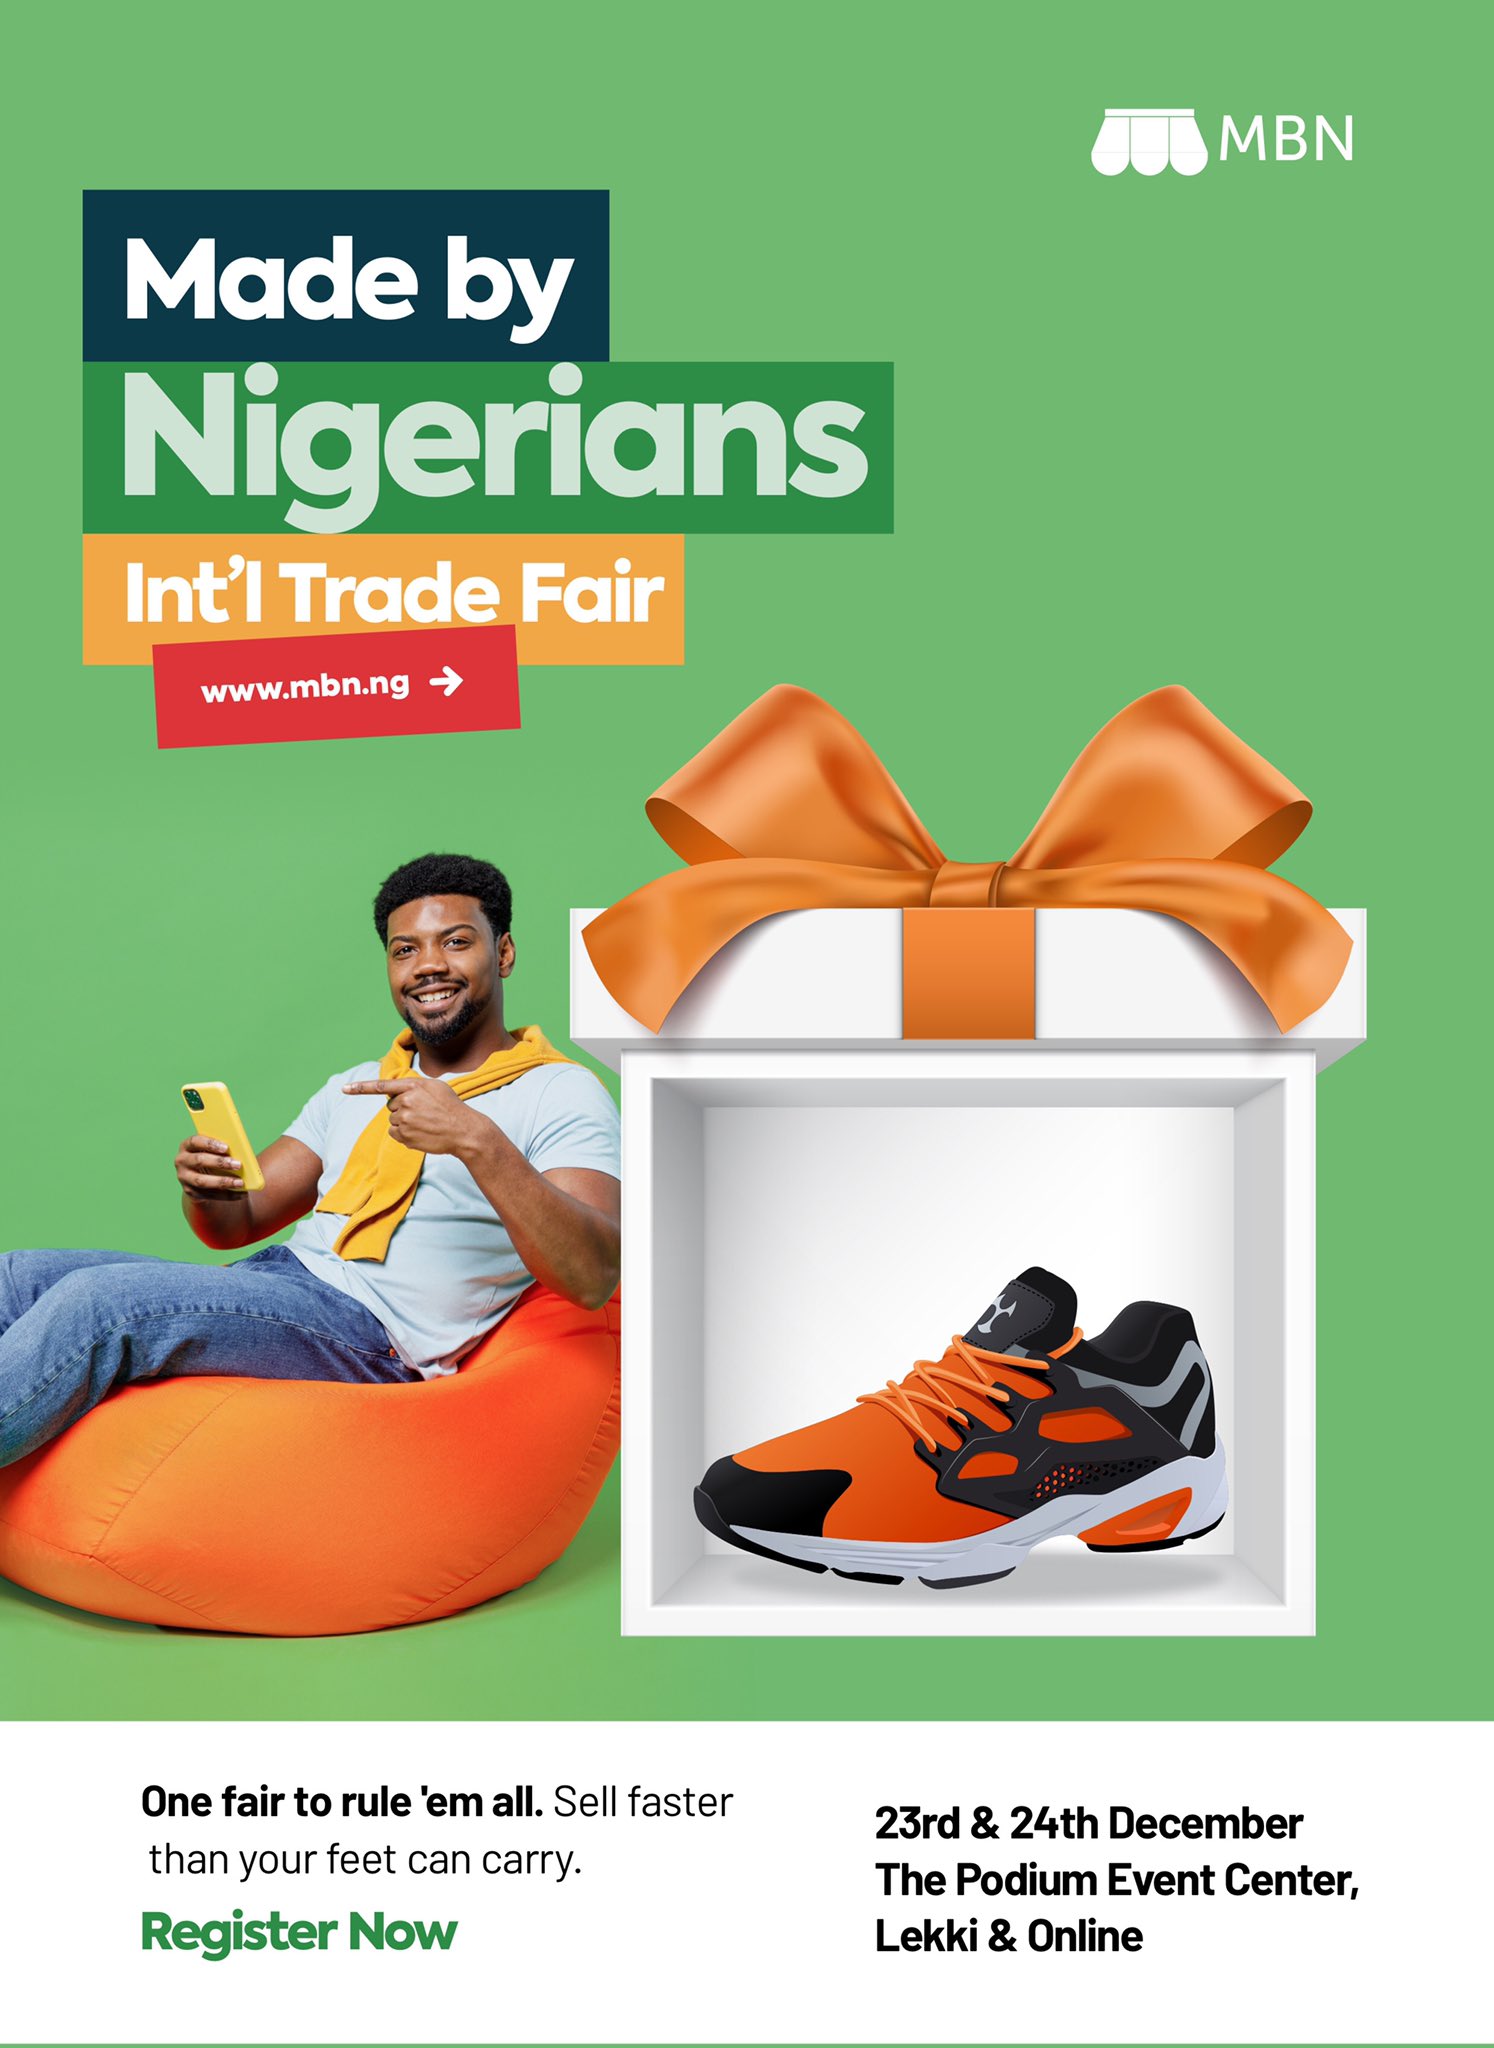 Made-By-Nigerians Trade Fair News in Nigeria today 